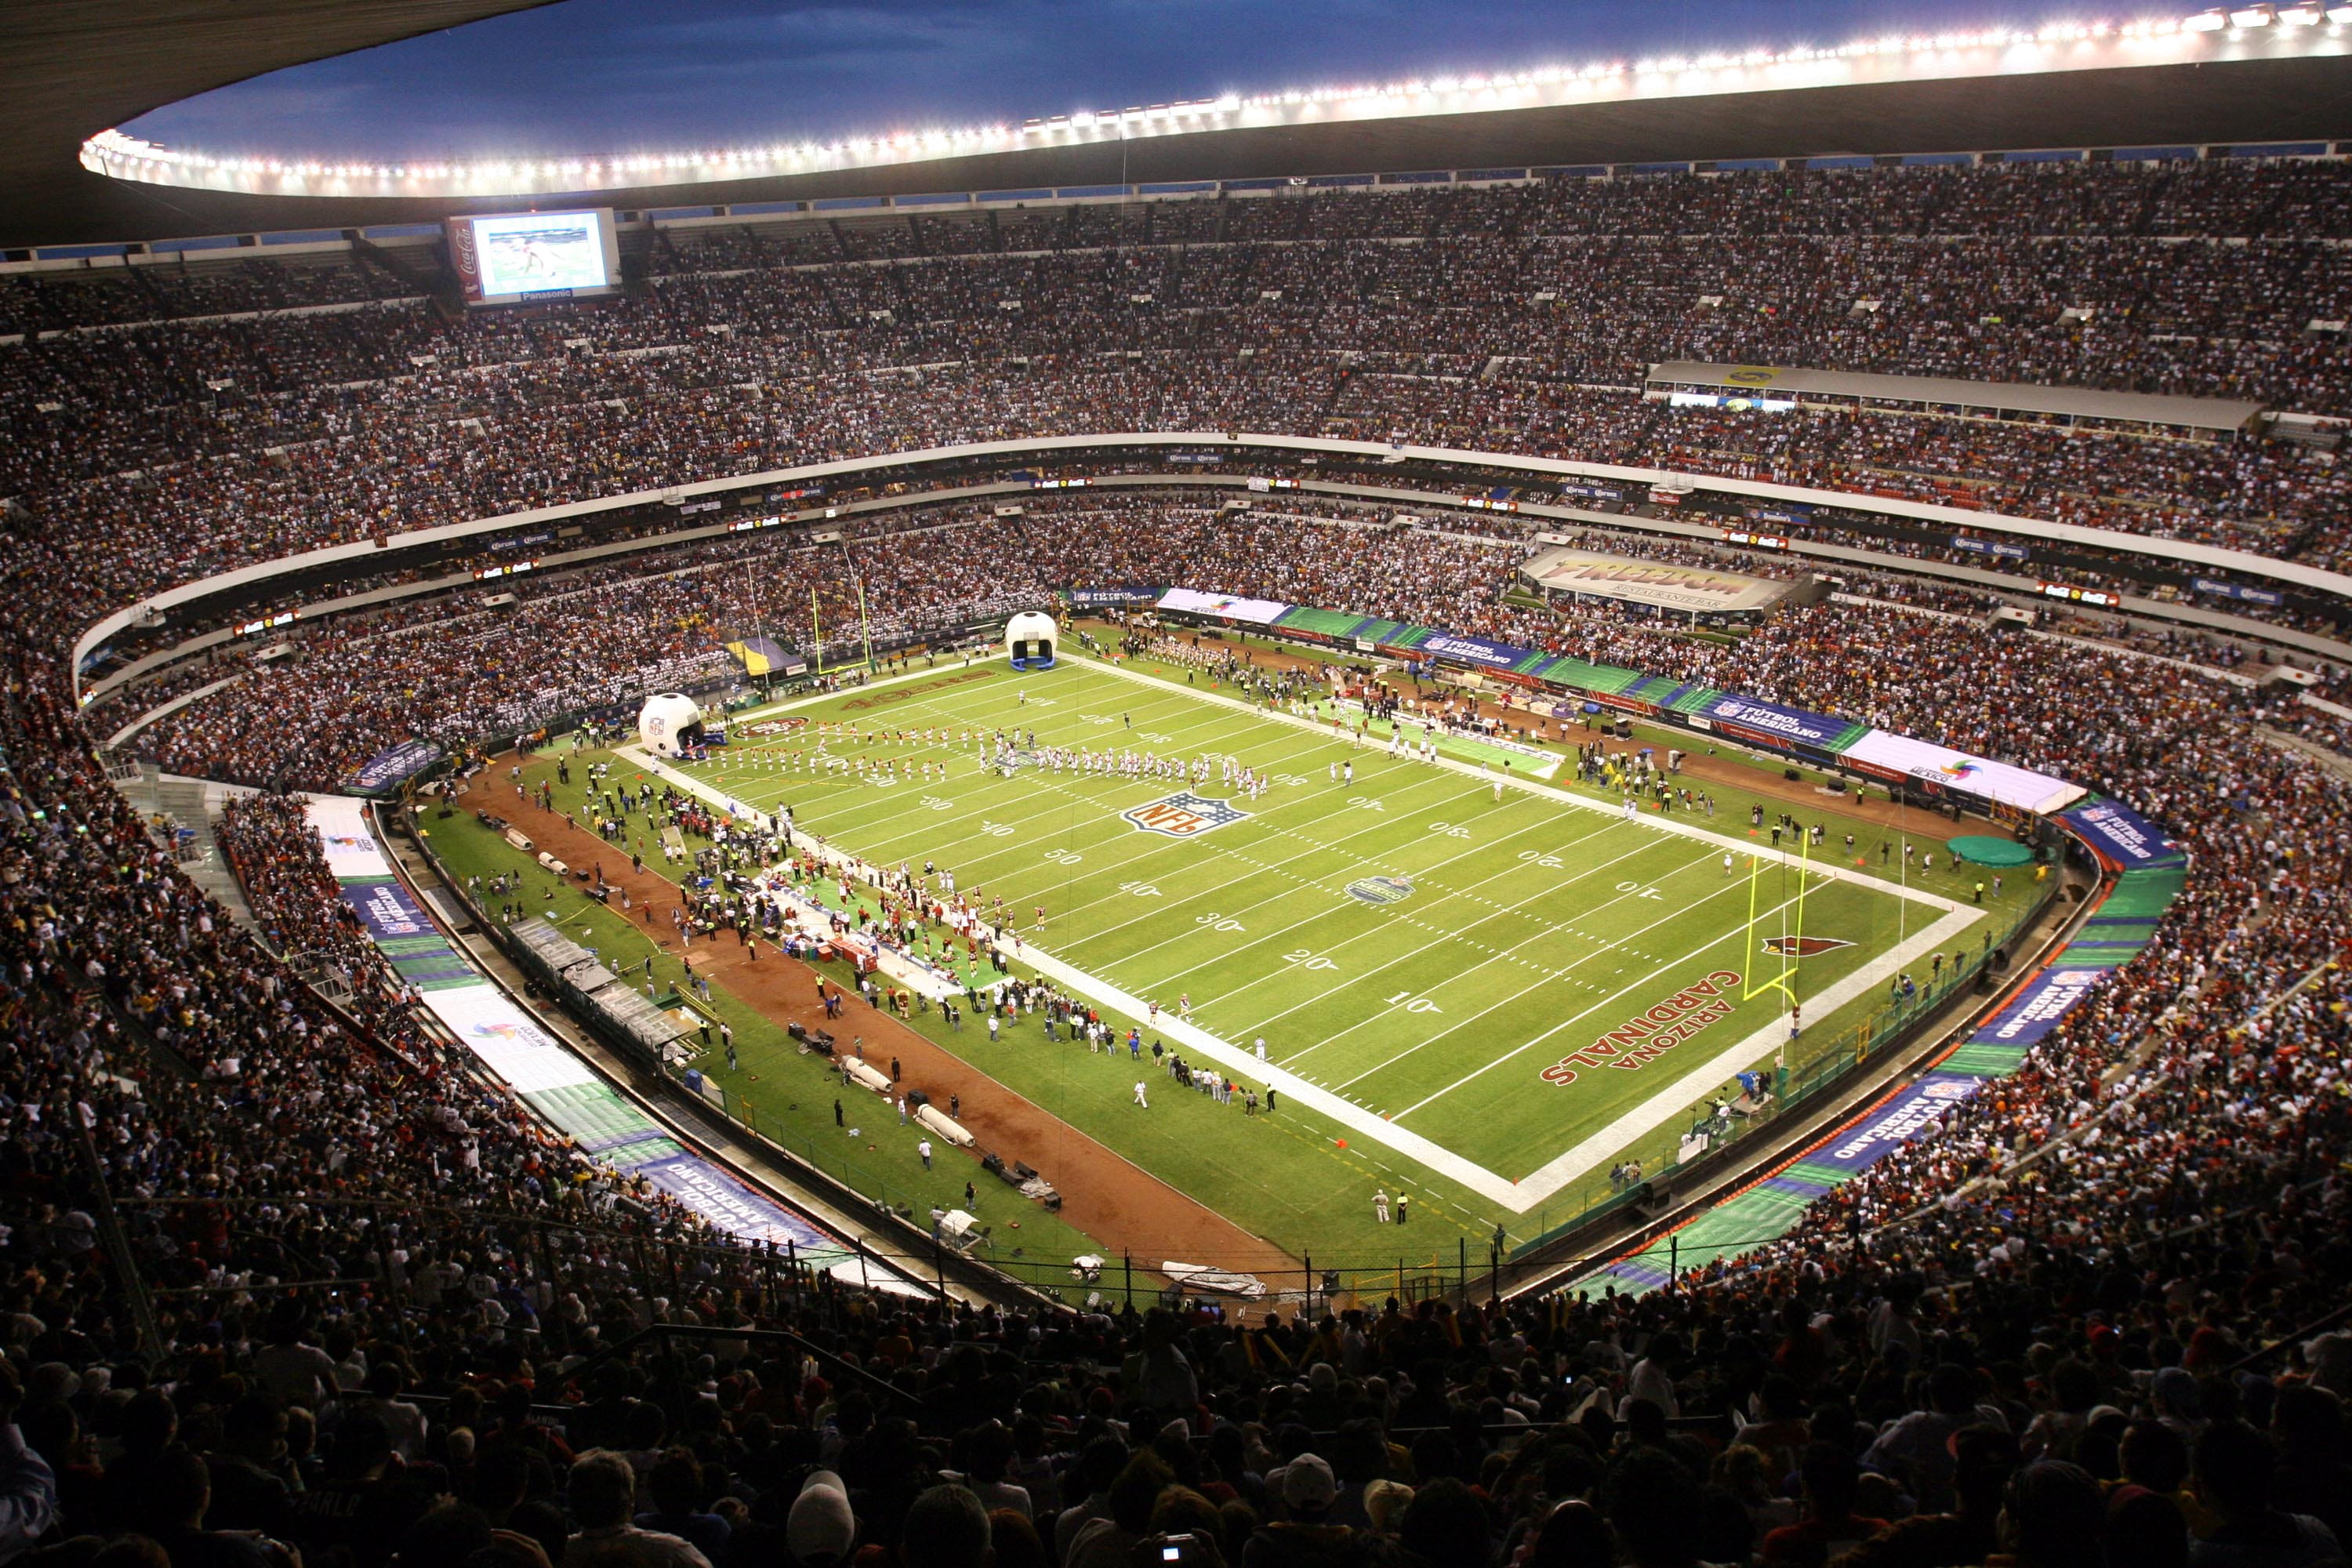 The Arizona Cardinals and the San Francisco 49ers play at Azteca Stadium in Mexico City in September 2005.